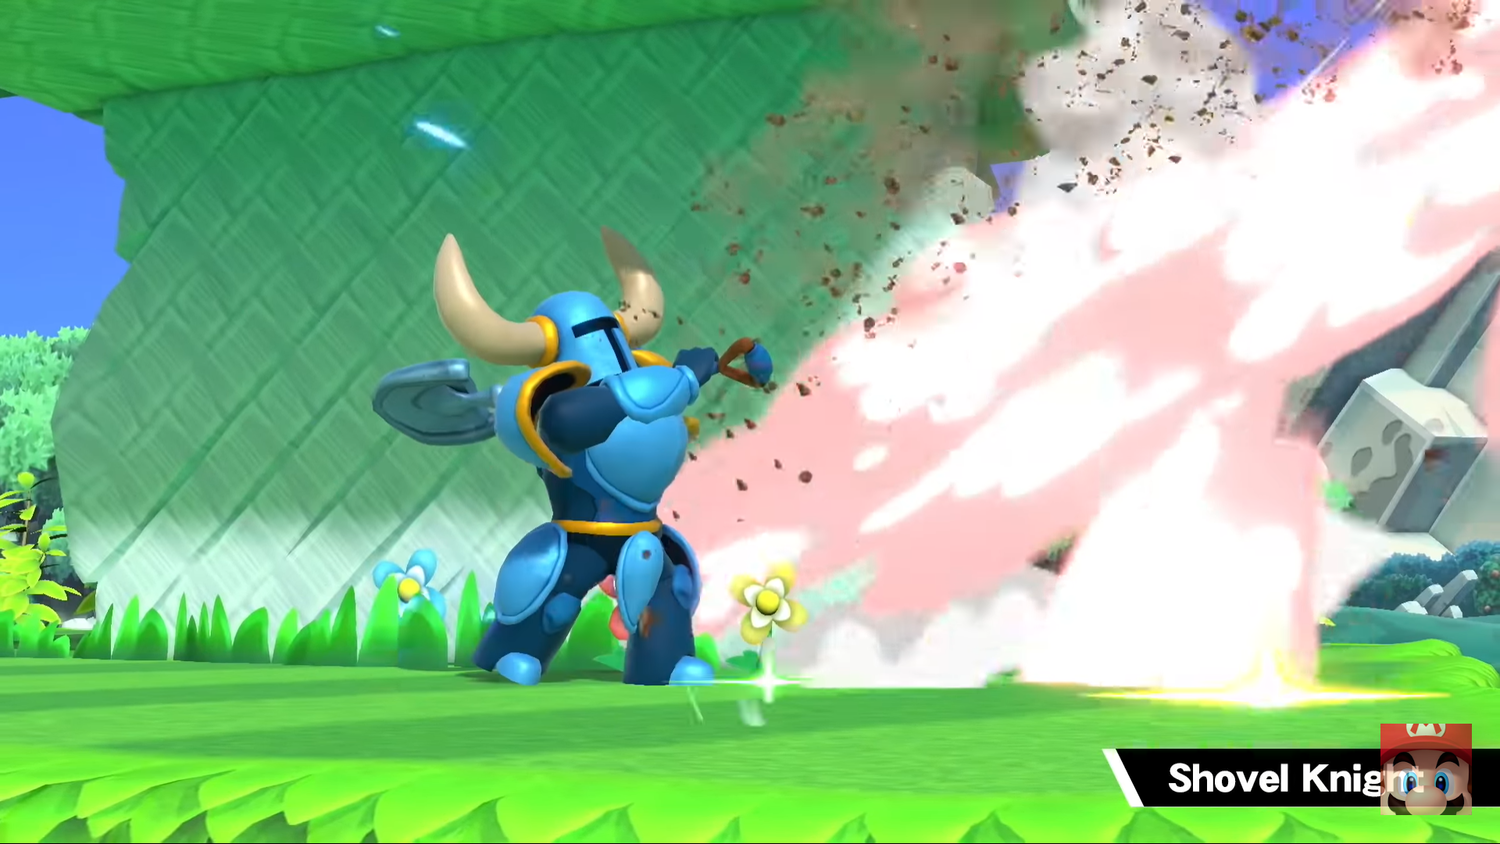  Shovel Knight is an Assist Trophy in Super Smash Bros Ultimate. Shovel Knight characters also appear as spirits. 